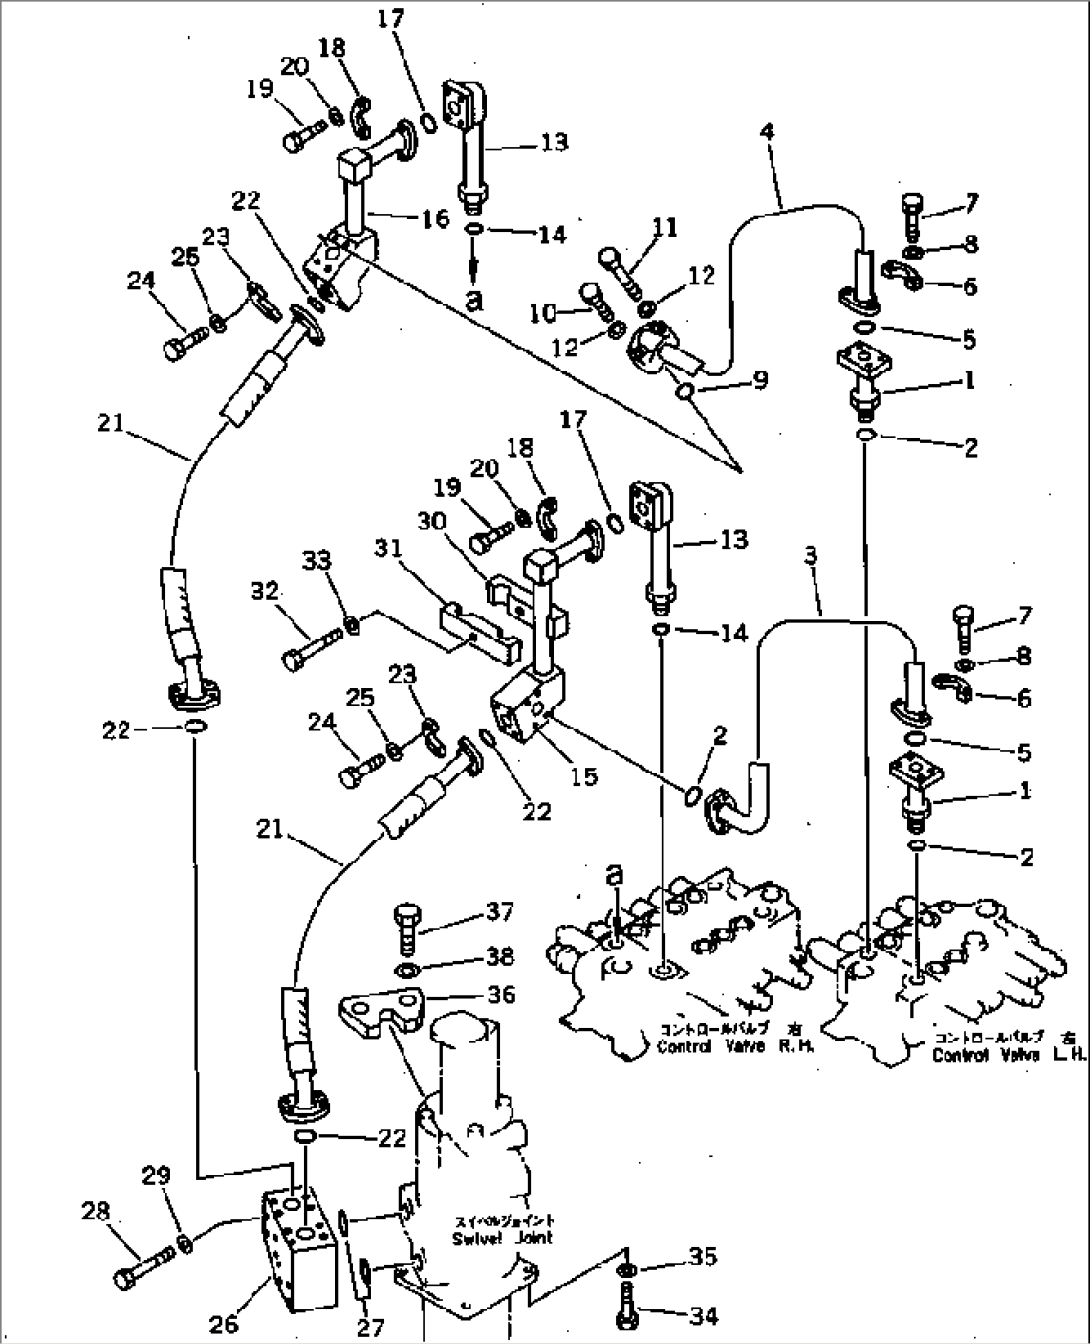 TRAVEL MOTOR PIPING (1/2) (CONTROL VALVE TO/FROM SWIVEL JOINT)